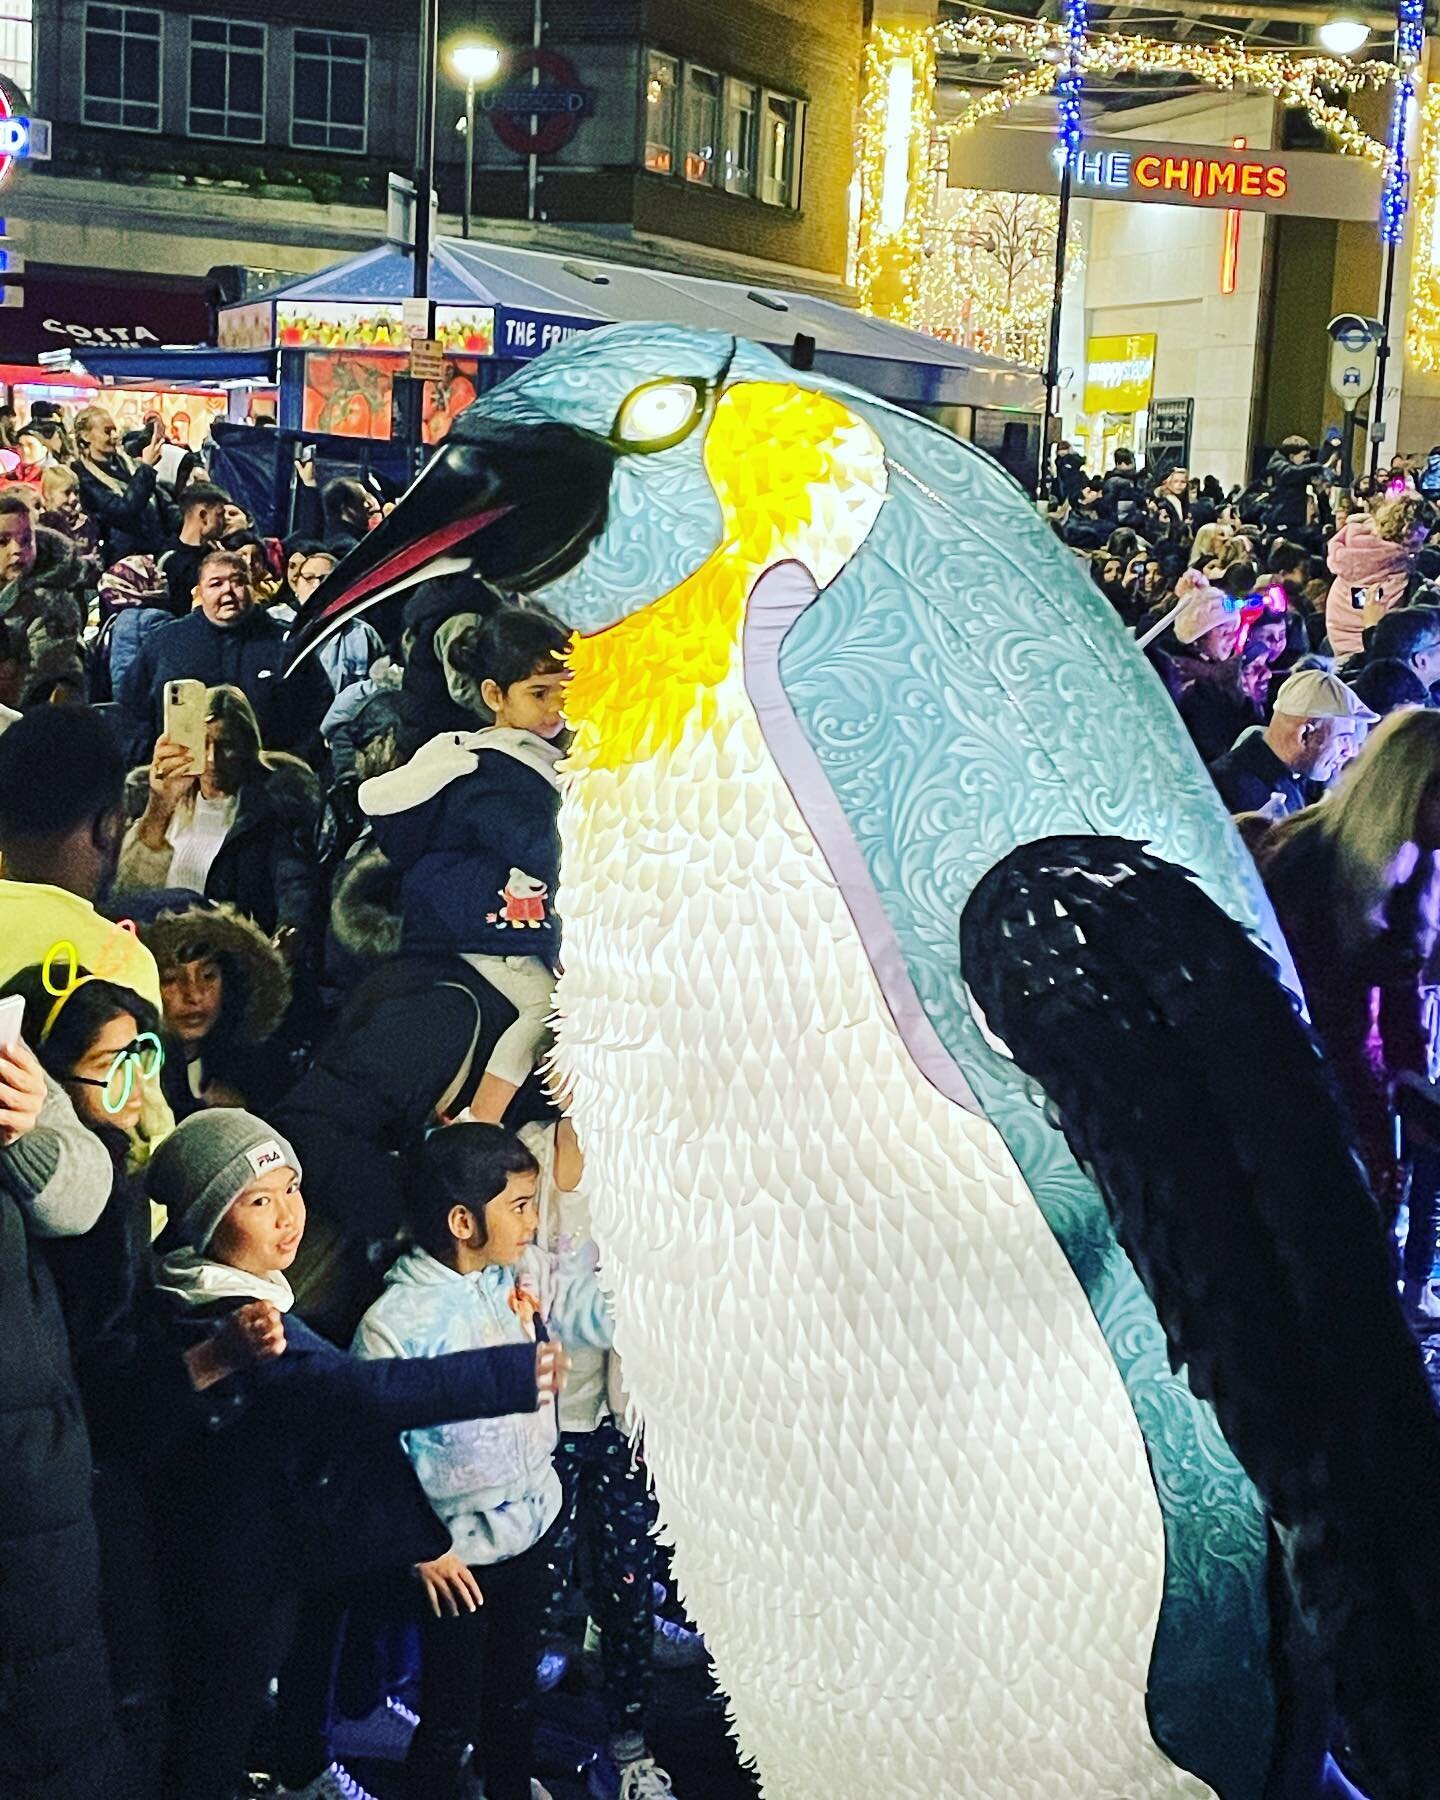 More penguin action, almost got some snow over the weekend which got us pretty excited.

#blizzardthepenguin #penguin #giantpenguin #illuminated #puppet #wintershow #antarcticadventure #antarctic #lightfestival #parade #outdoorartsuk #christmas #chri